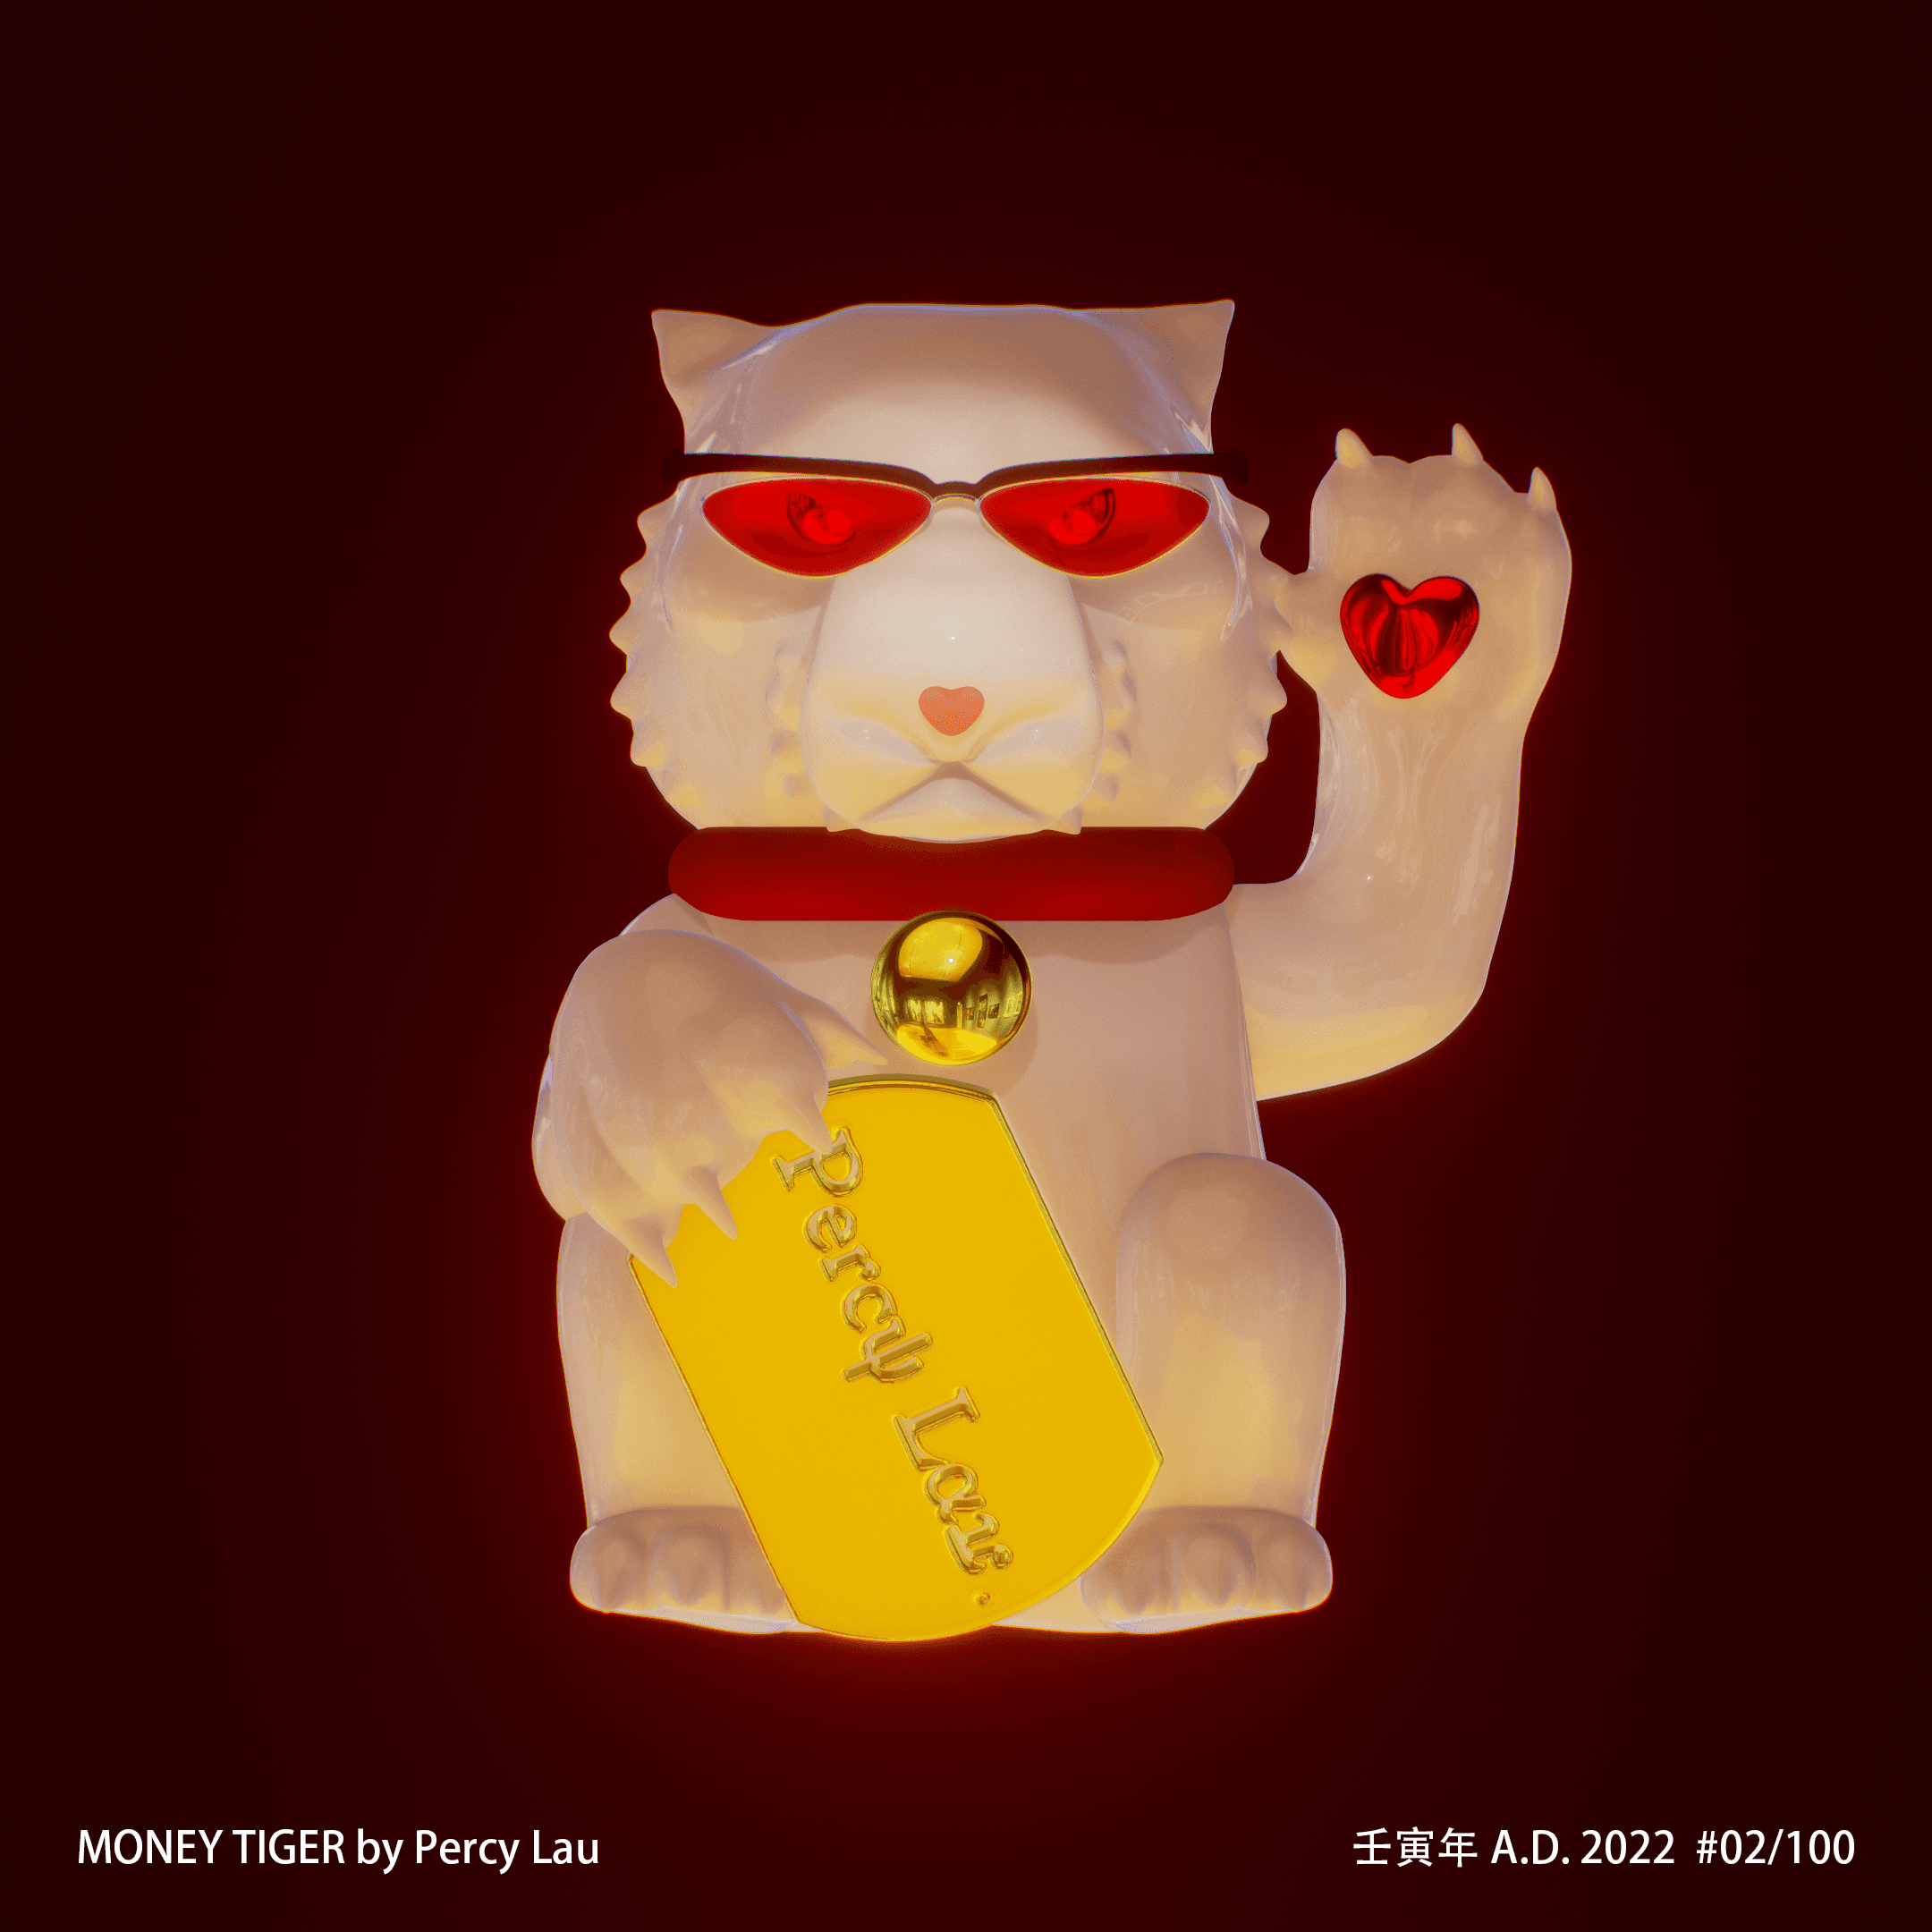 MONEY TIGER-Happy CHINESE NEW YEAR #02/100